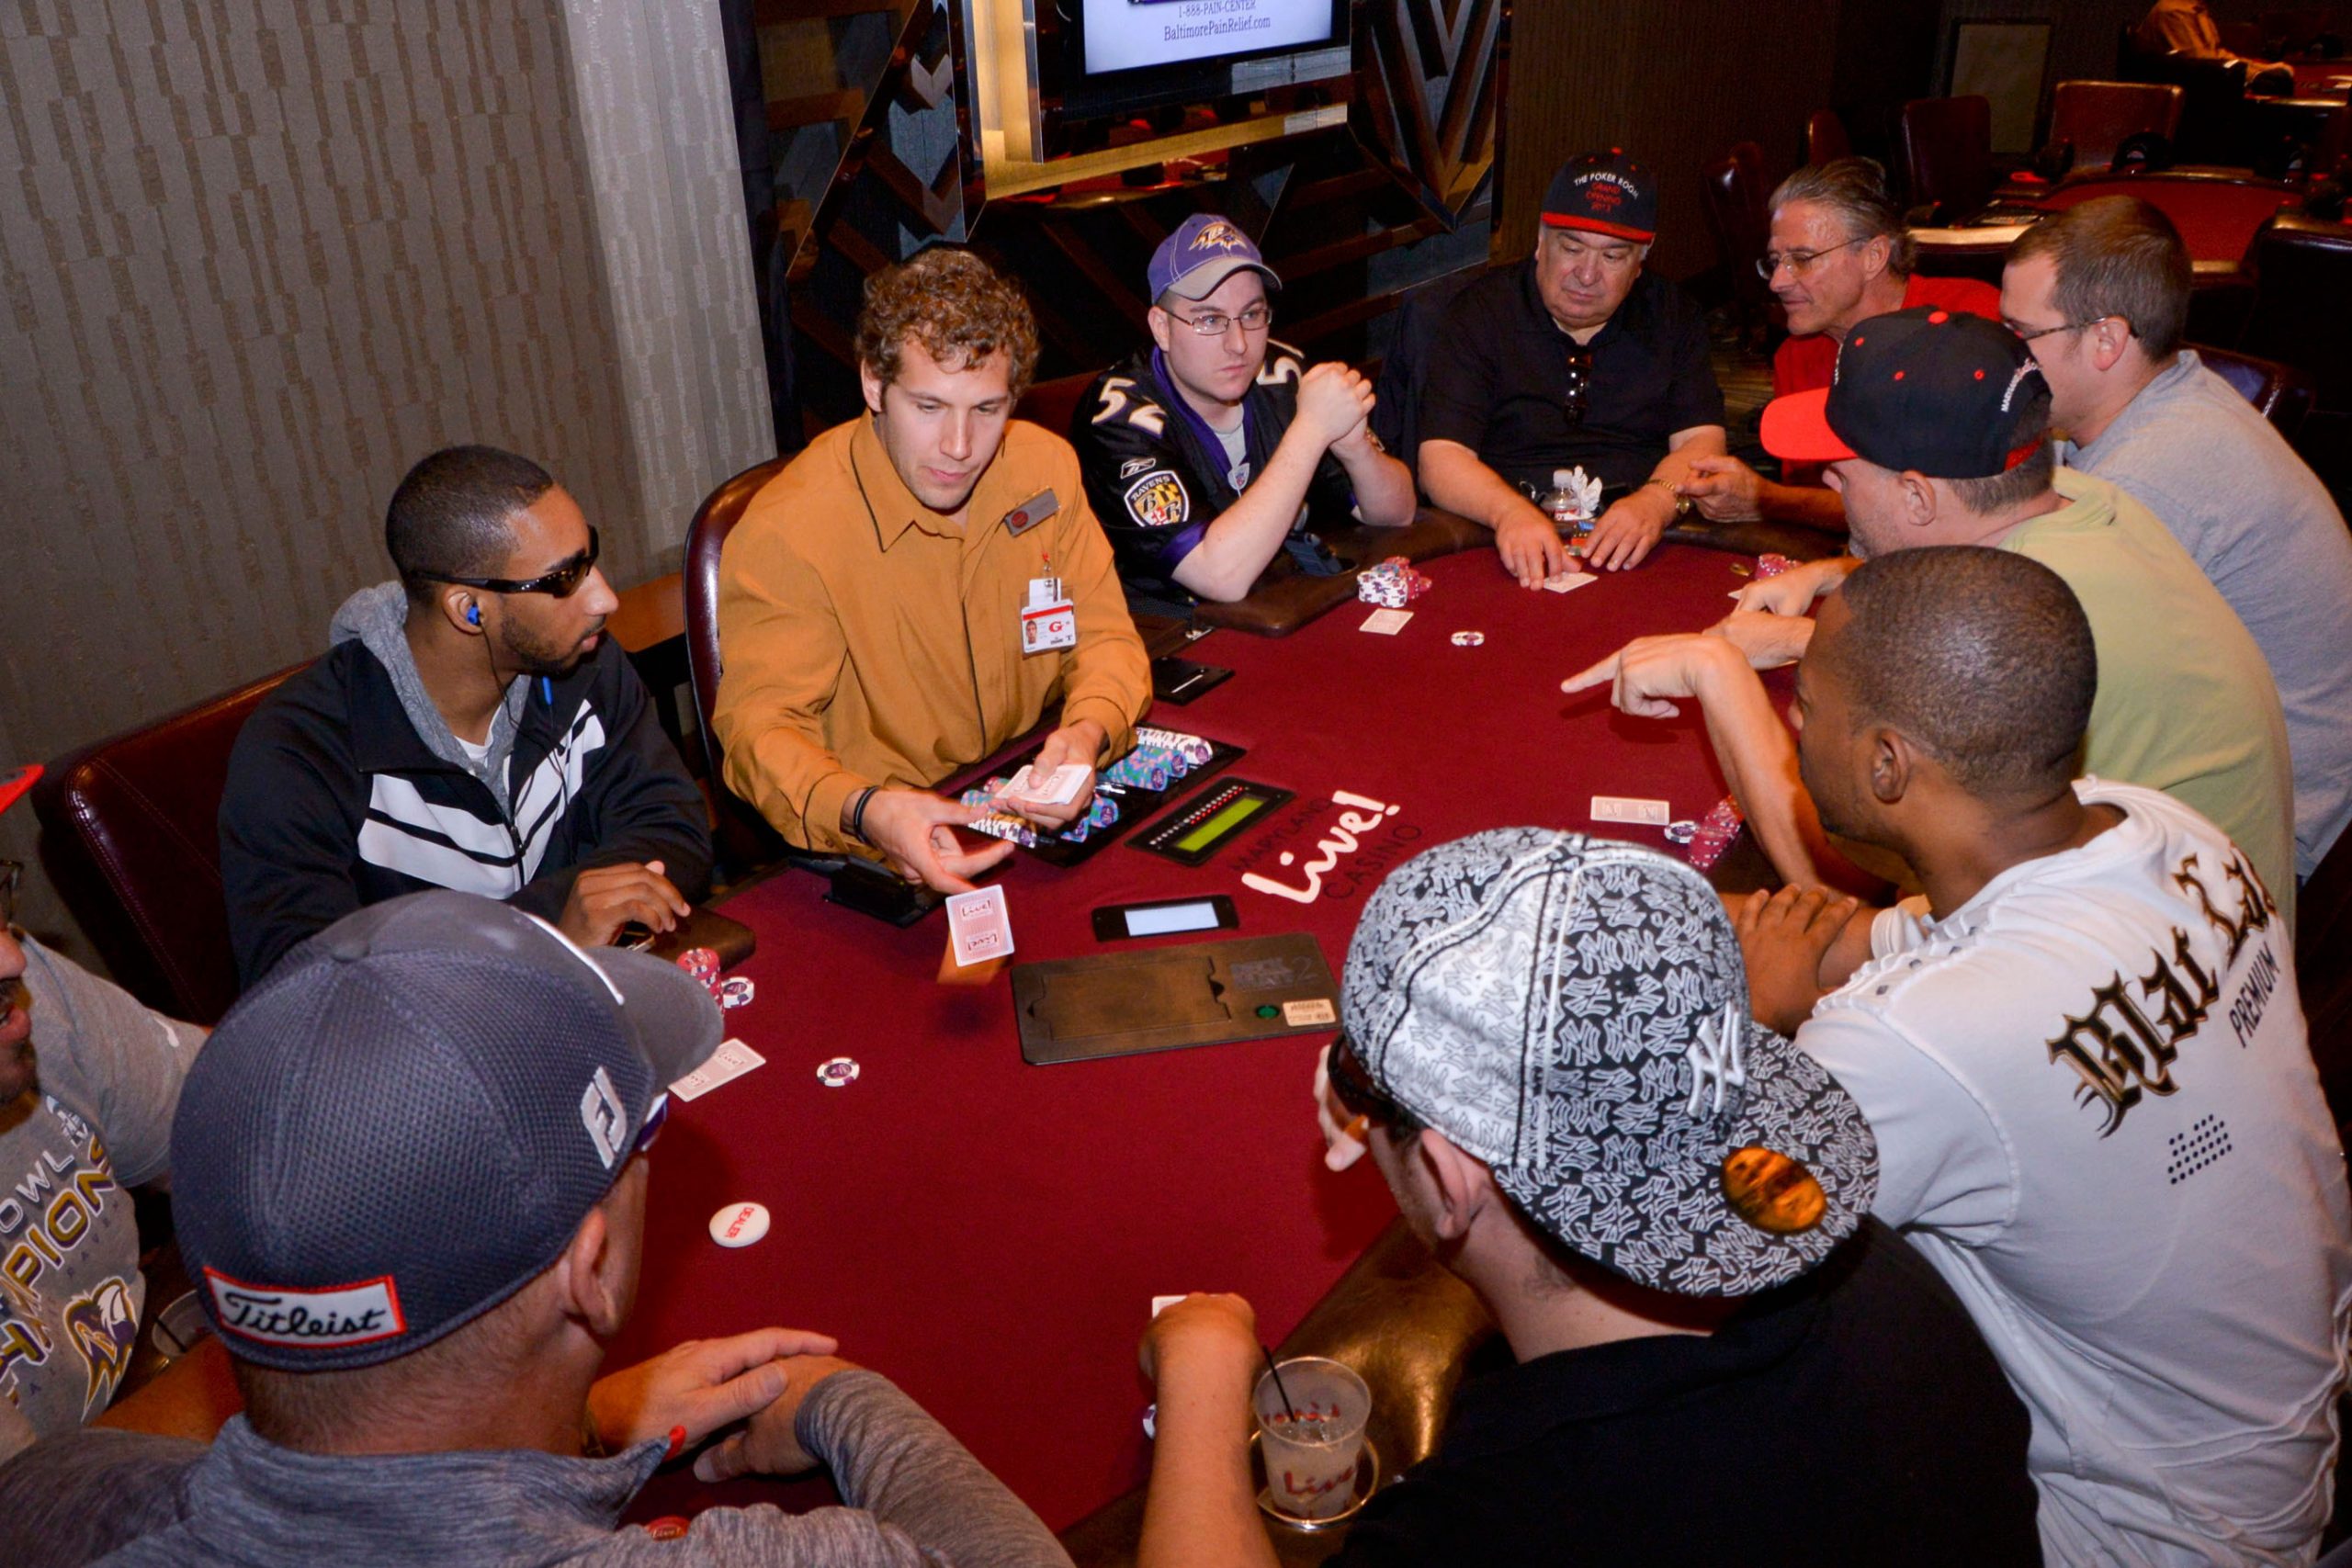 August’s Maryland State Poker Championship Offers Million Dollar Guarantee to East Coast Players